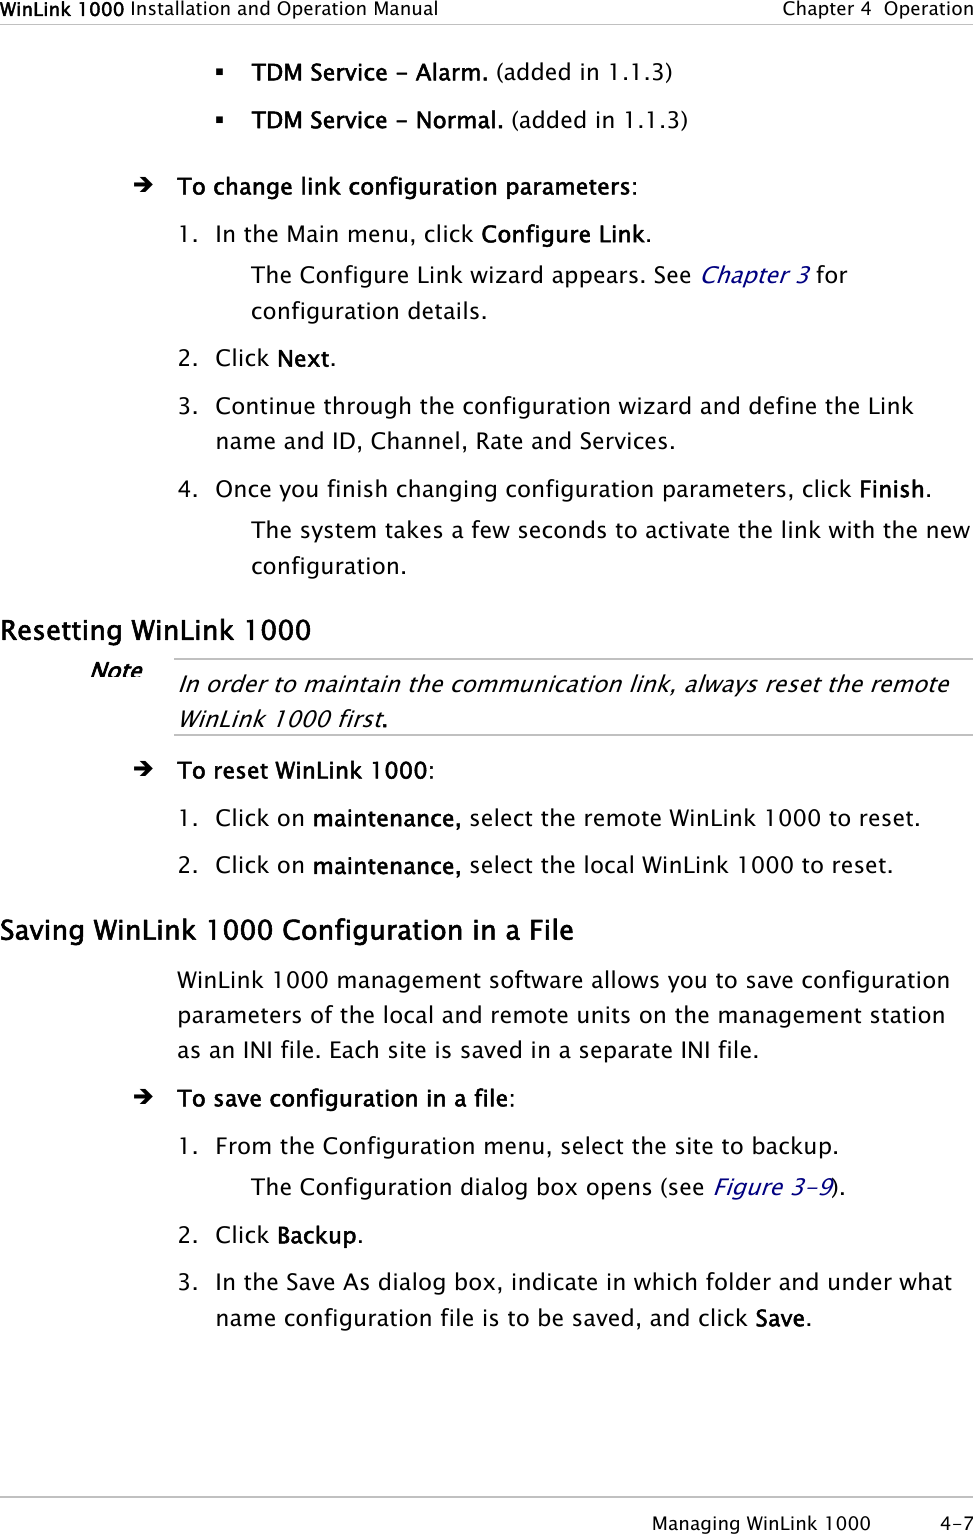 WinLink 1000 Installation and Operation Manual  Chapter 4  Operation  TDM Service - Alarm. (added in 1.1.3)  TDM Service - Normal. (added in 1.1.3) Î To change link configuration parameters: 1. In the Main menu, click Configure Link. The Configure Link wizard appears. See Chapter 3 for configuration details. 2. Click Next. 3. Continue through the configuration wizard and define the Link name and ID, Channel, Rate and Services. 4. Once you finish changing configuration parameters, click Finish. The system takes a few seconds to activate the link with the new configuration. Resetting WinLink 1000 Note In order to maintain the communication link, always reset the remote WinLink 1000 first.  Î To reset WinLink 1000: 1. Click on maintenance, select the remote WinLink 1000 to reset. 2. Click on maintenance, select the local WinLink 1000 to reset. Saving WinLink 1000 Configuration in a File WinLink 1000 management software allows you to save configuration parameters of the local and remote units on the management station as an INI file. Each site is saved in a separate INI file. Î To save configuration in a file: 1. From the Configuration menu, select the site to backup. The Configuration dialog box opens (see Figure 3-9). 2. Click Backup. 3. In the Save As dialog box, indicate in which folder and under what name configuration file is to be saved, and click Save.  Managing WinLink 1000  4-7 